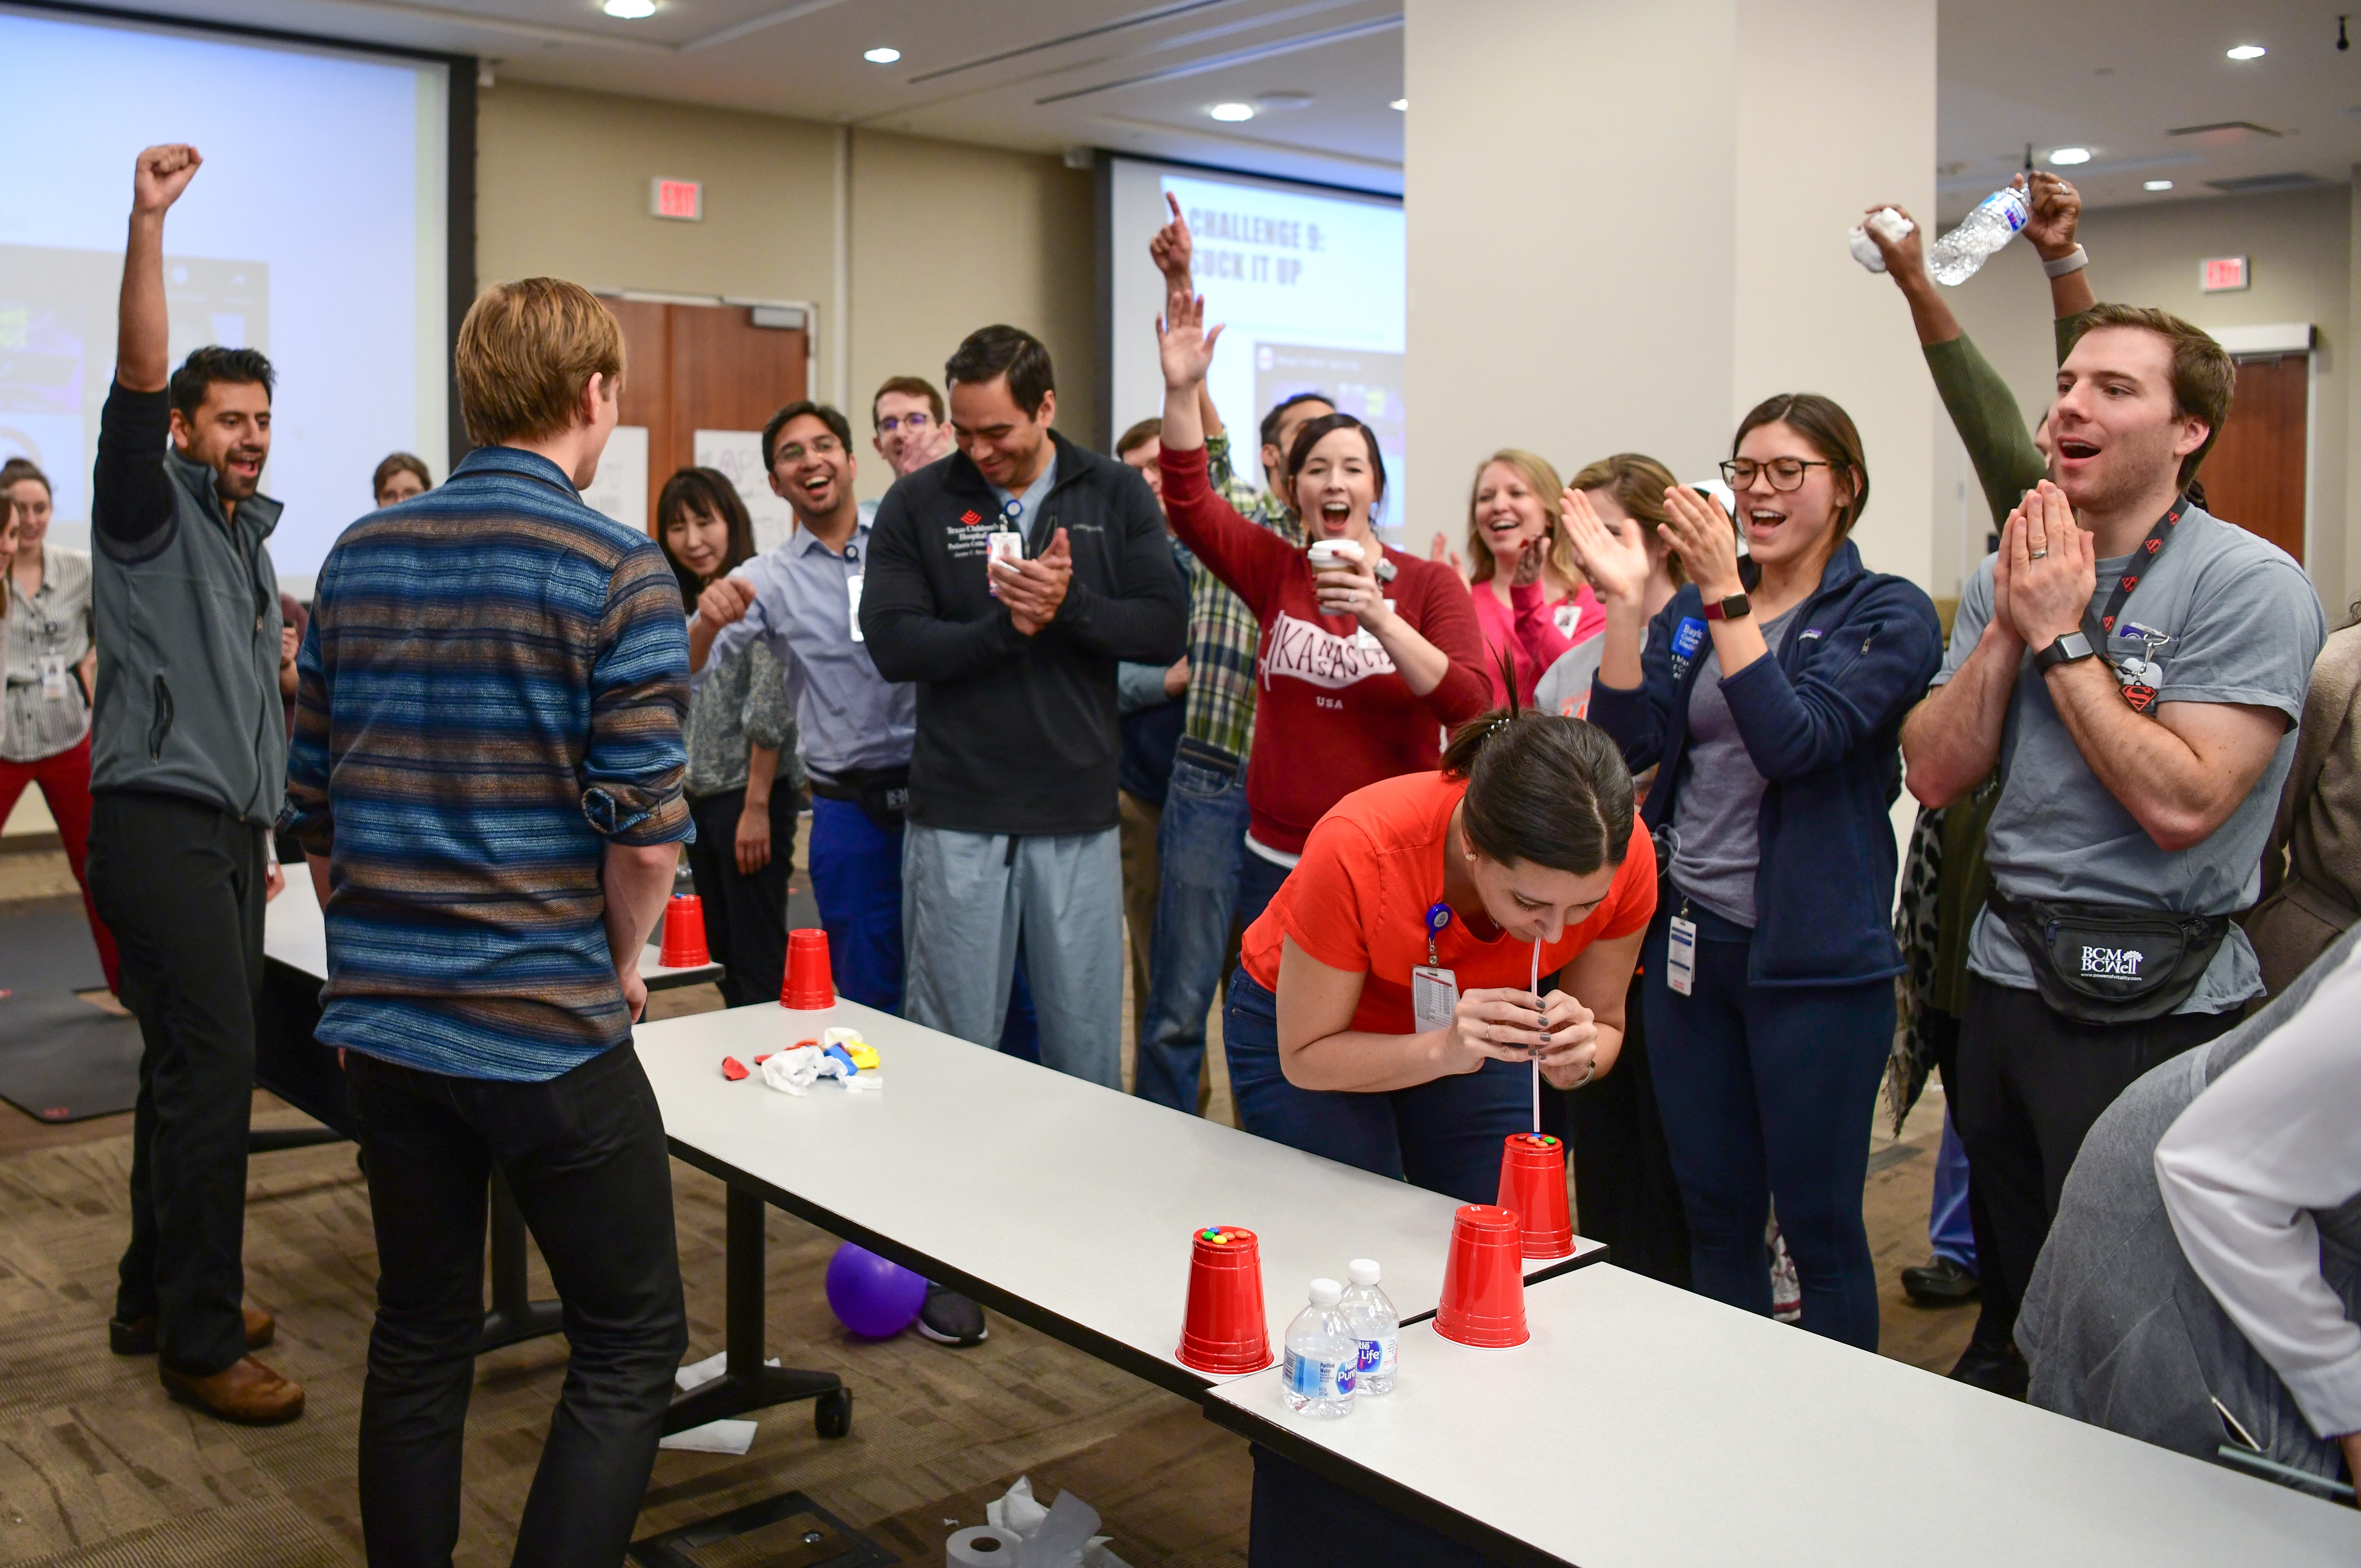 Minute to Win it Challenges during Fellows Fun Day Retreat"